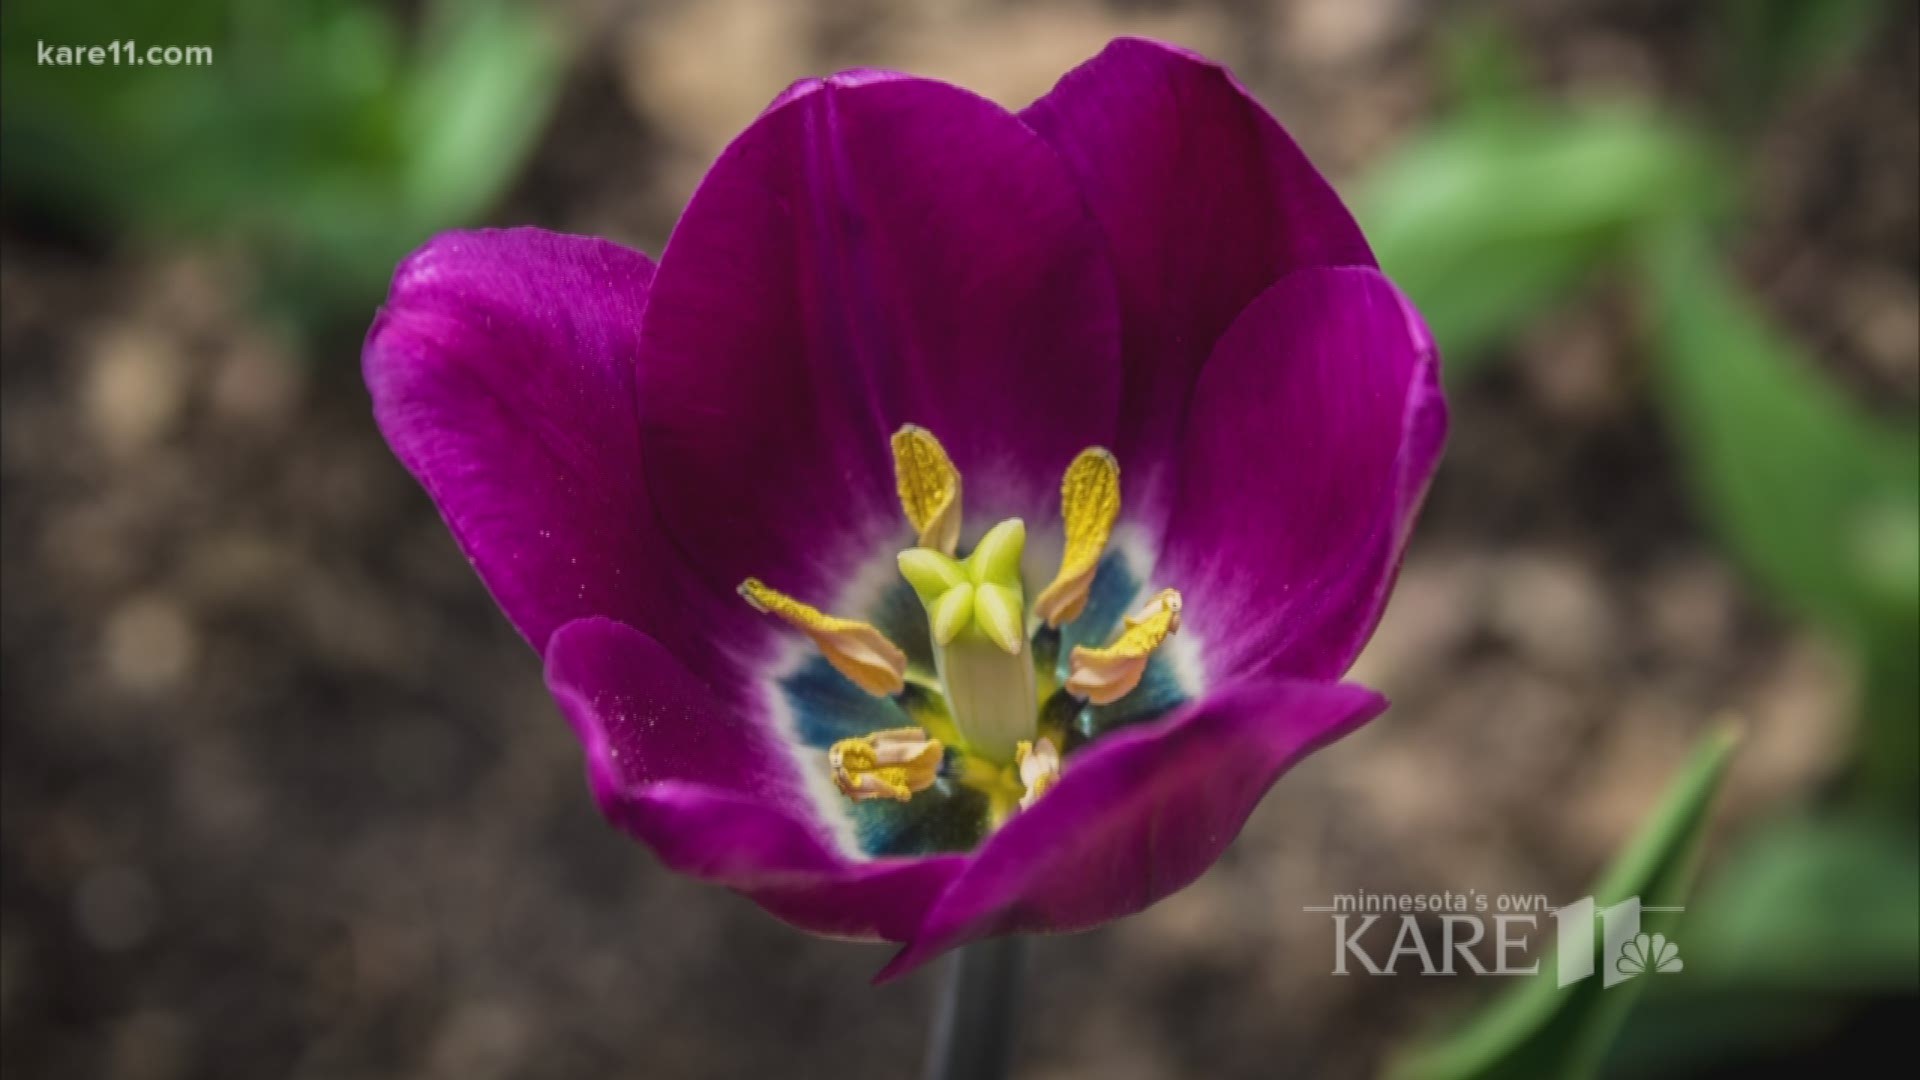 If you want to see spring in all its beautiful color, head to Lyndale Park in Minneapolis. Ellery McCardle gives you a glimpse in her latest photo stop.